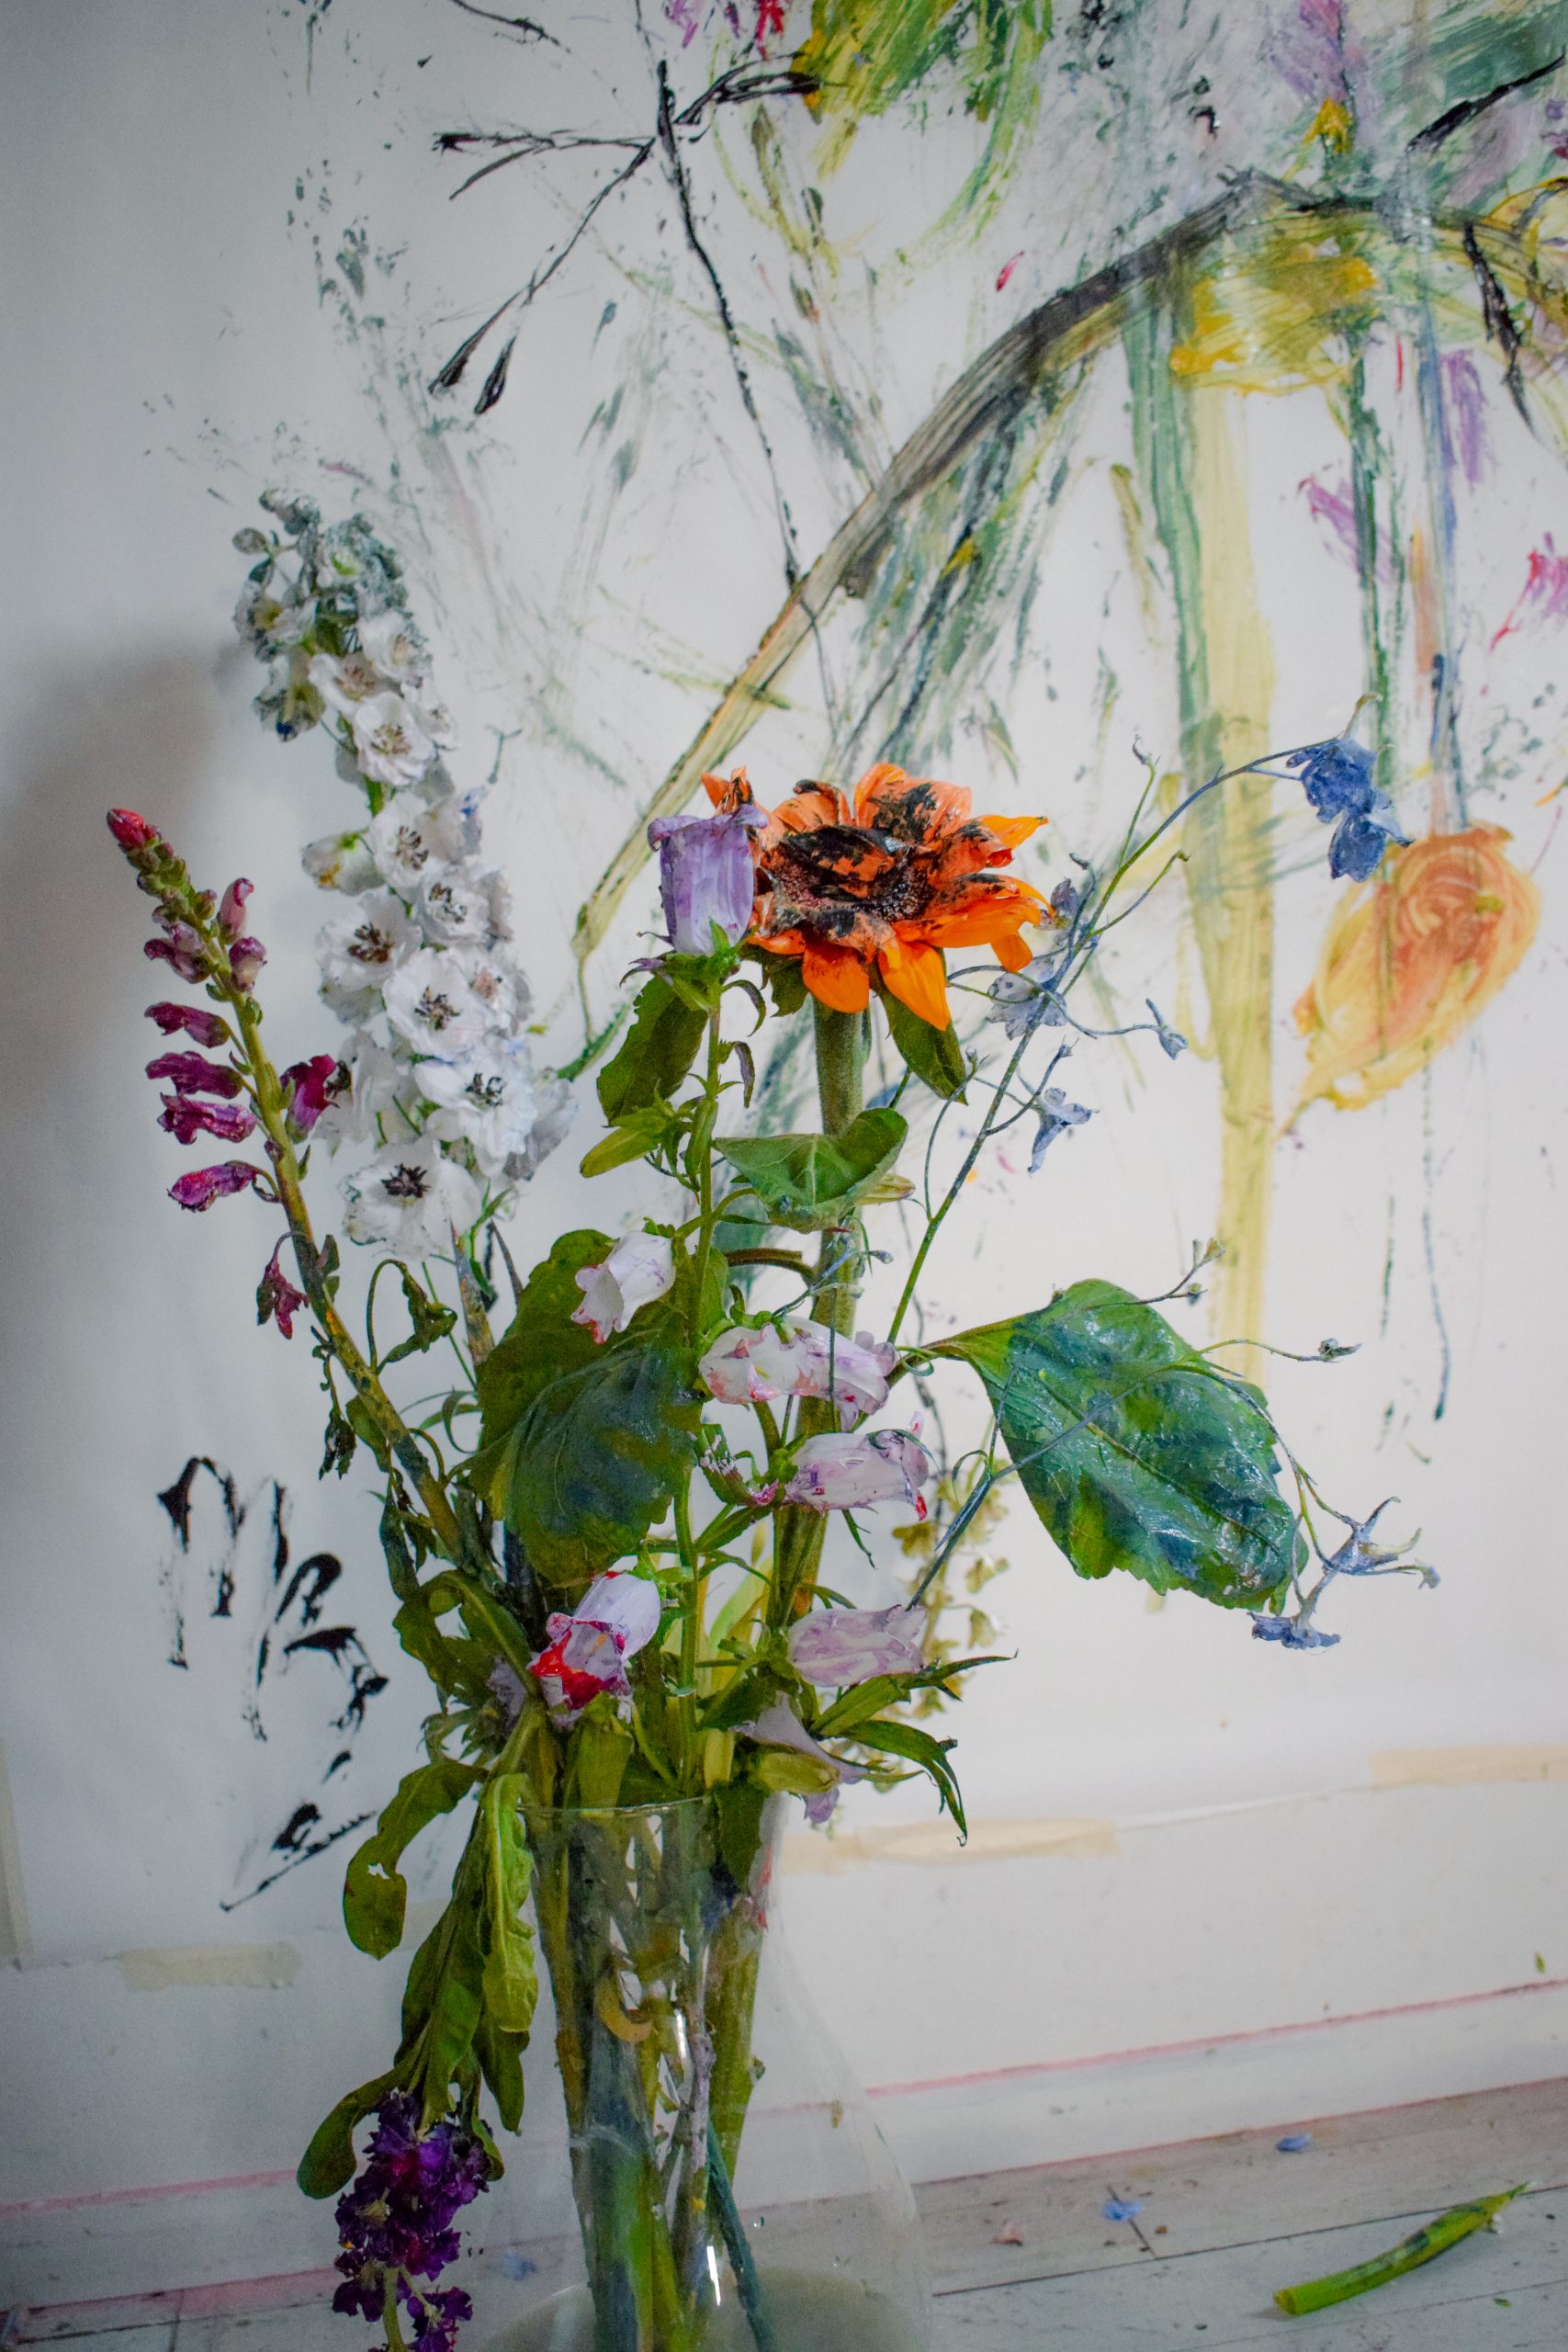 Painting flowers by using flowers – experimental painting